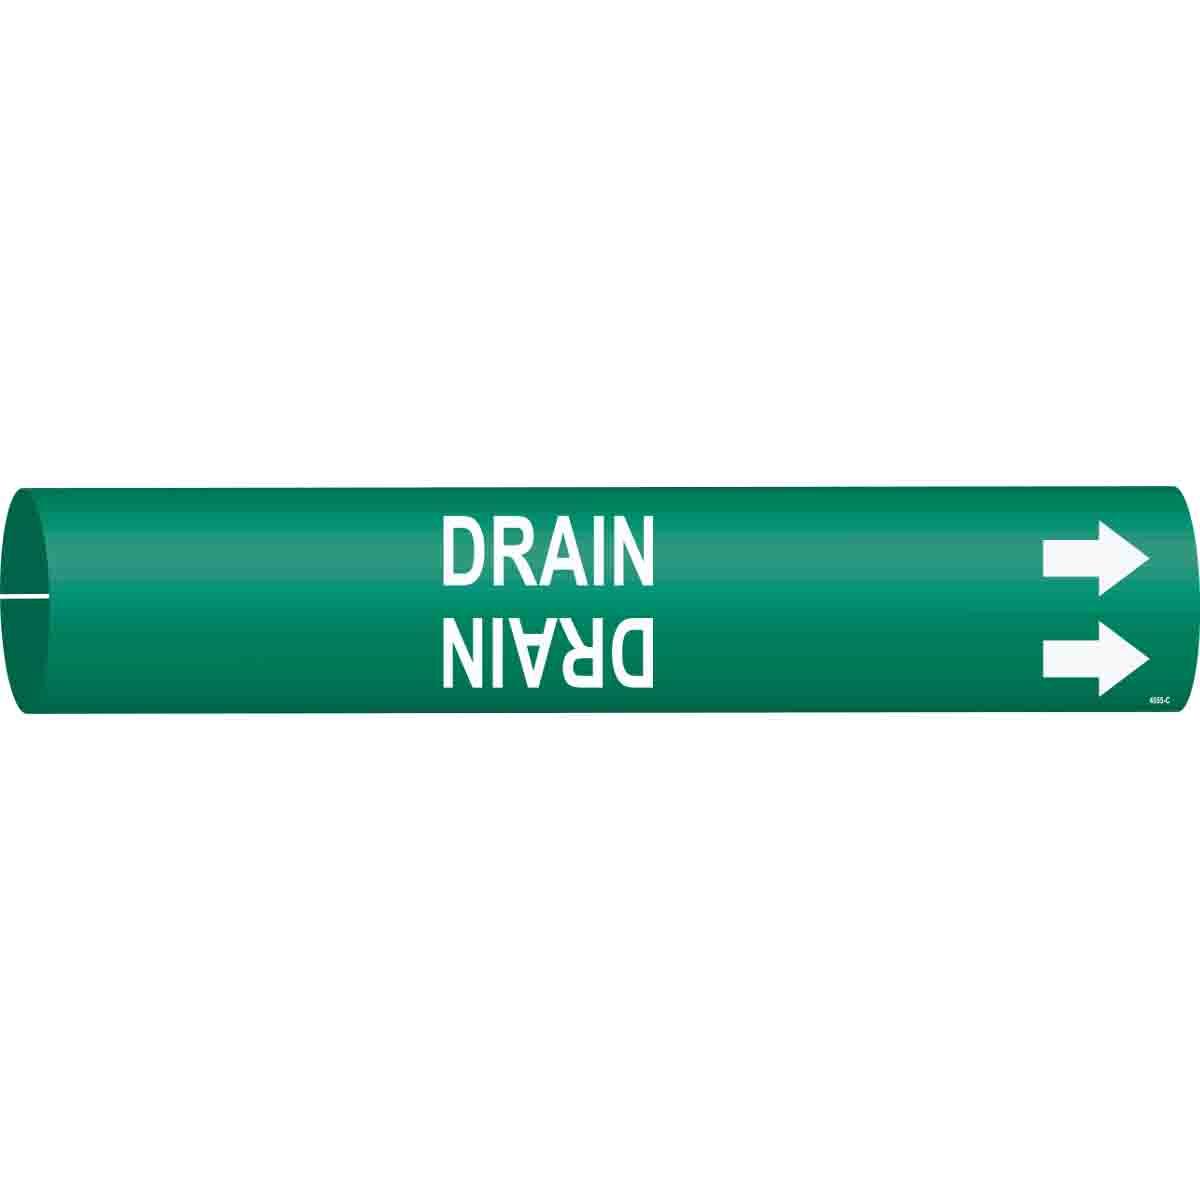 Brady® BradySnap-On™ 4055-B B Style Pipe and Valve Marker, DRAIN with Right Arrow Symbol Legend, White on Green, Fits Pipe Dia: 1-1/2 to 2-3/8 in, 7/8 in H x 7/8 in W, B-915 Plastic, Snap-On Mount